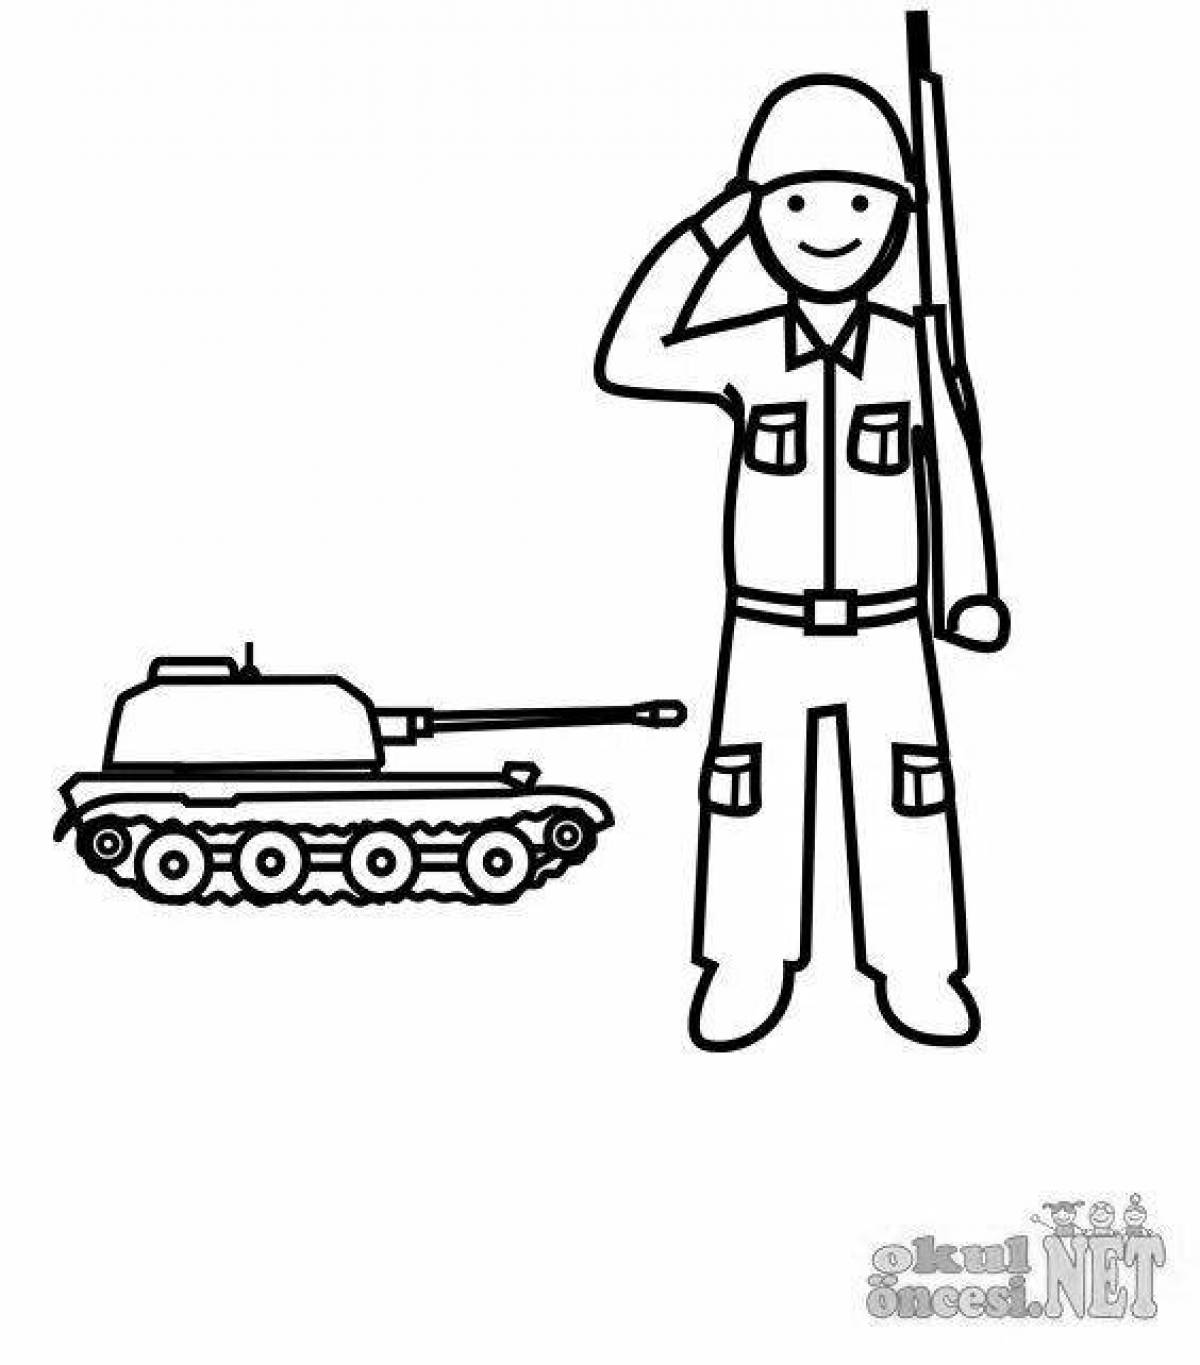 Adorable tanker coloring book for kids